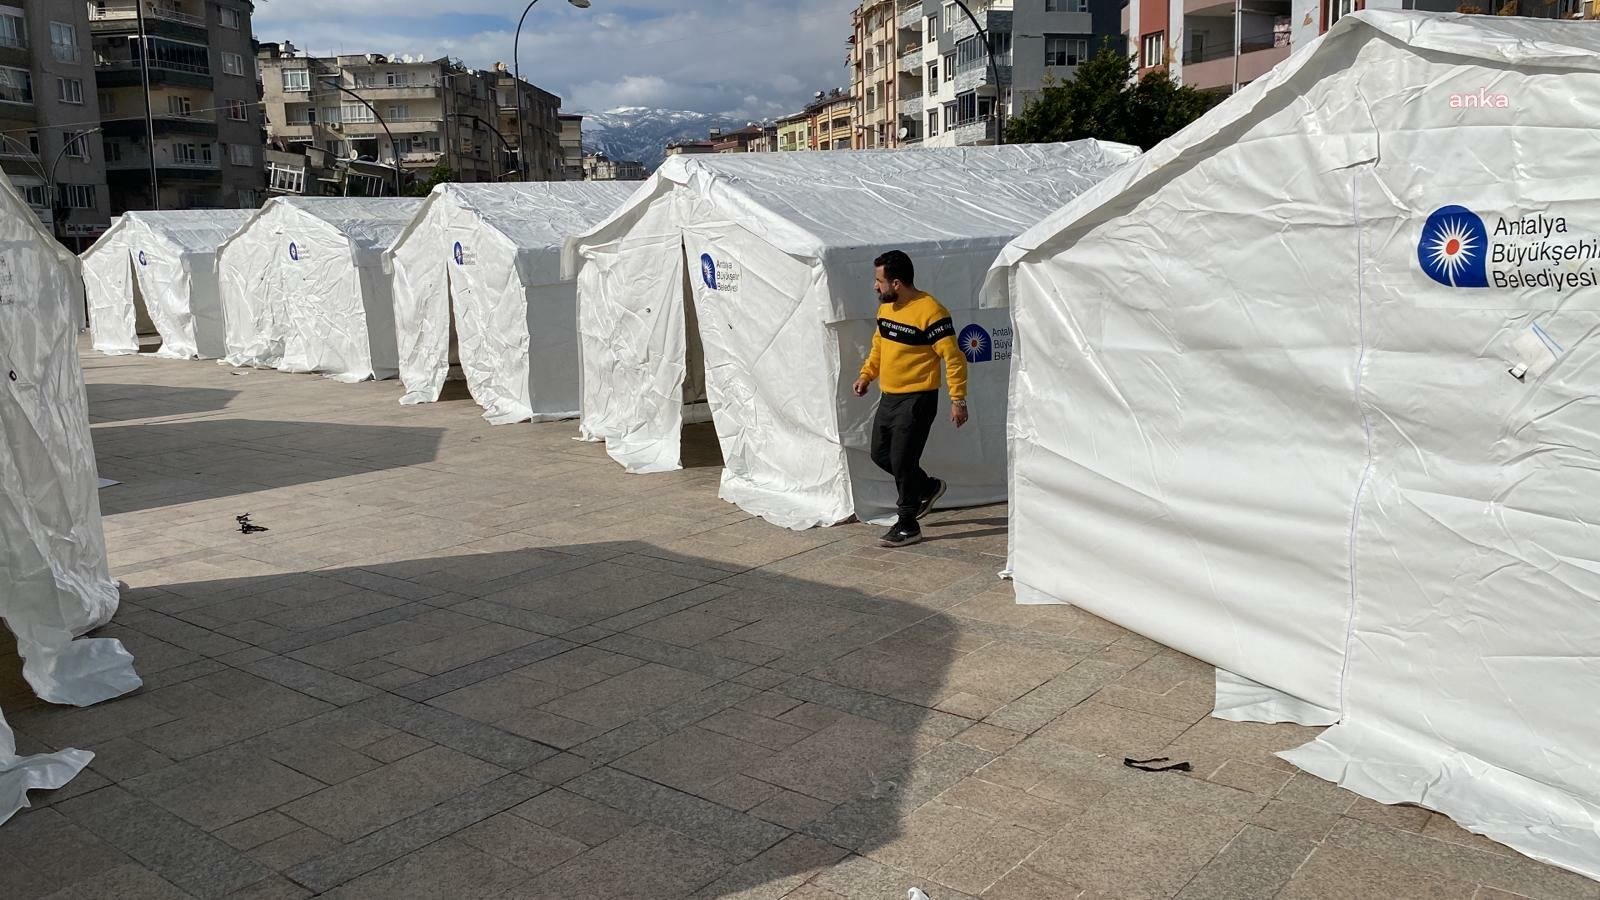 Türkiye discloses number of set up tents in earthquake zone